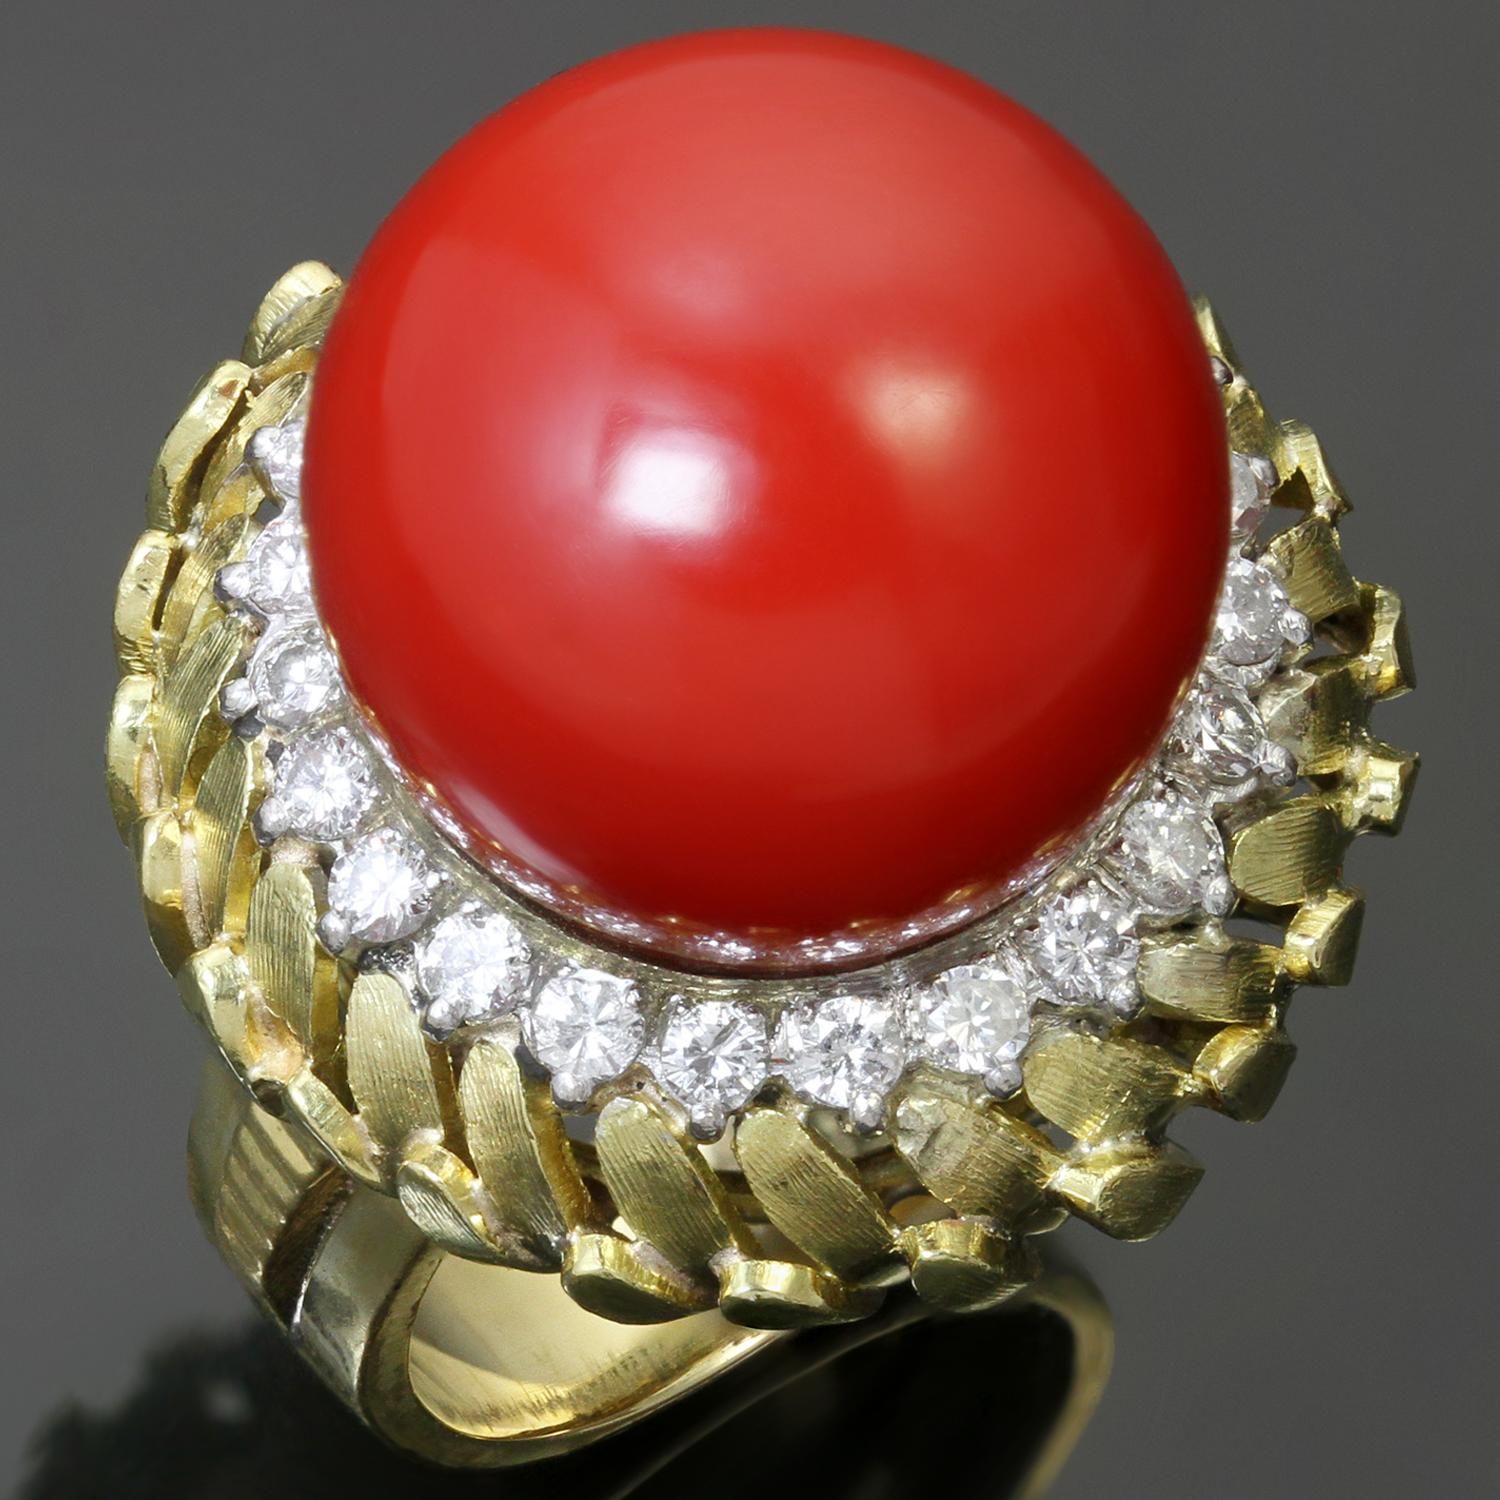 The gorgeous rare vintage ring is crafted in 18k yellow gold and features a sphere-shaped natural oxblood coral measuring 16.50mm x 15.55mm, accented with full-cut diamonds weighing an estimated 0.70 carats, set in 18k white gold. Made in United